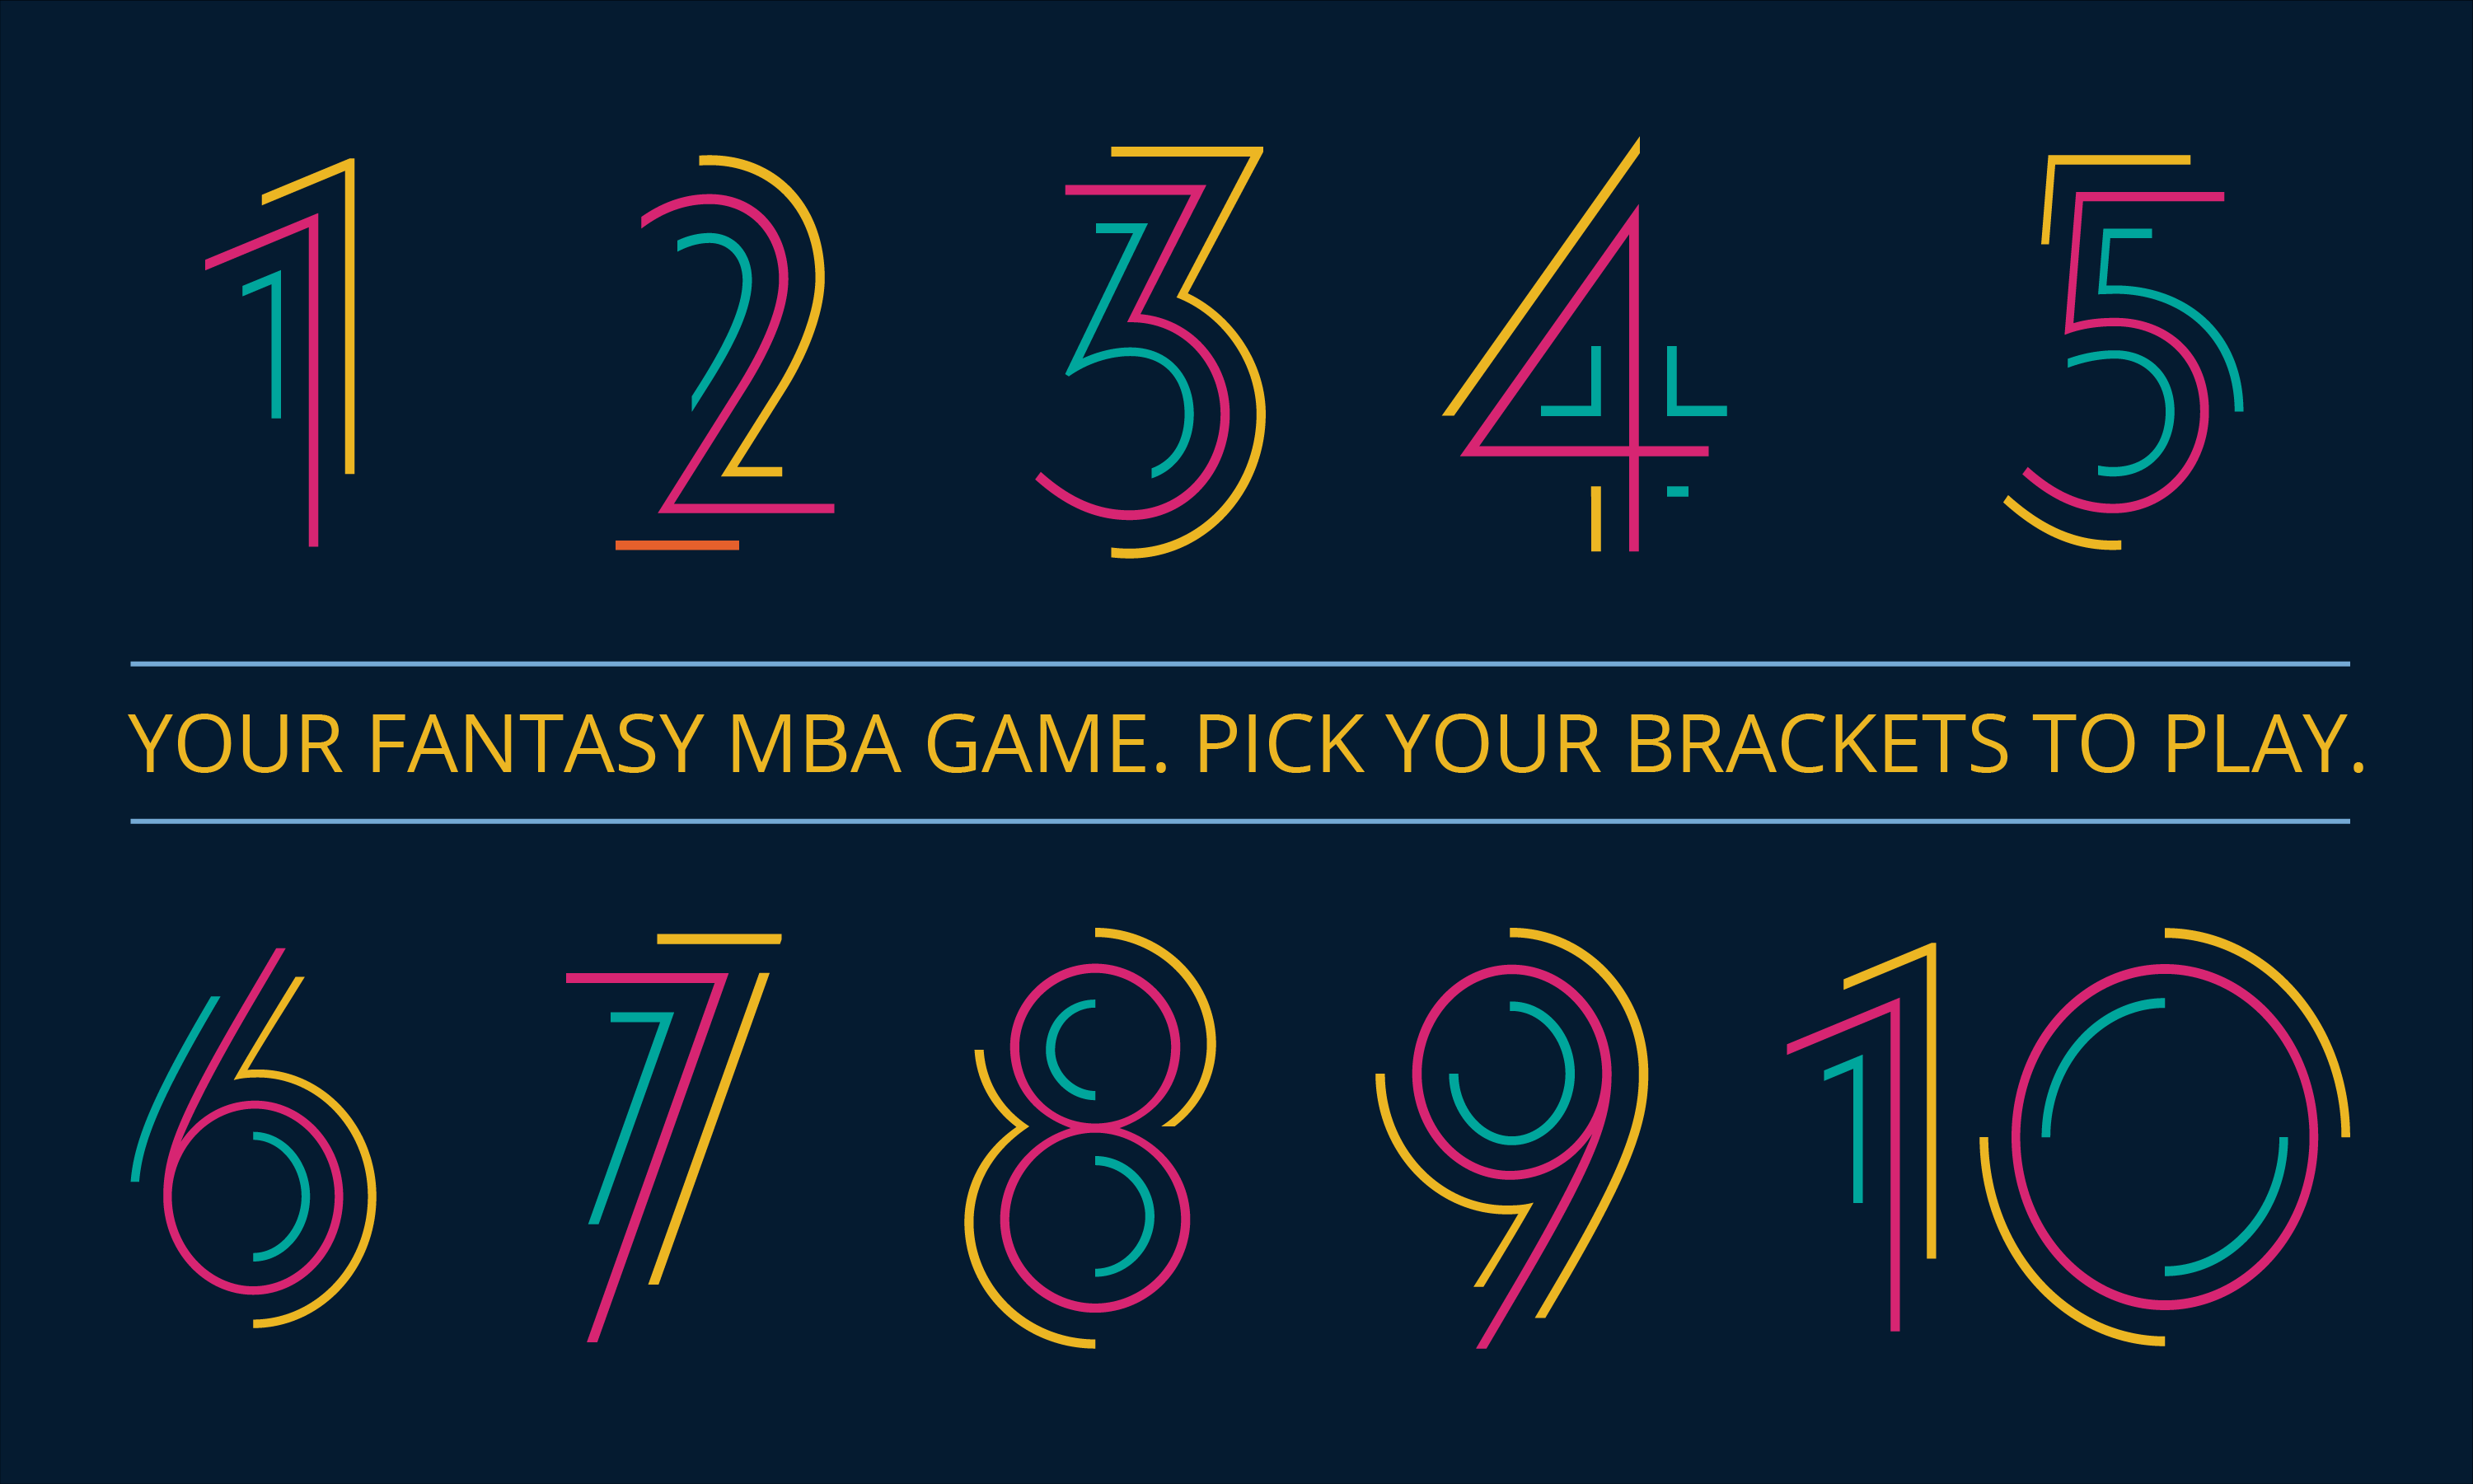 Permalink to: "Fantasy MBA Ranking Game: Rules, Prizes, & Bragging Rights"